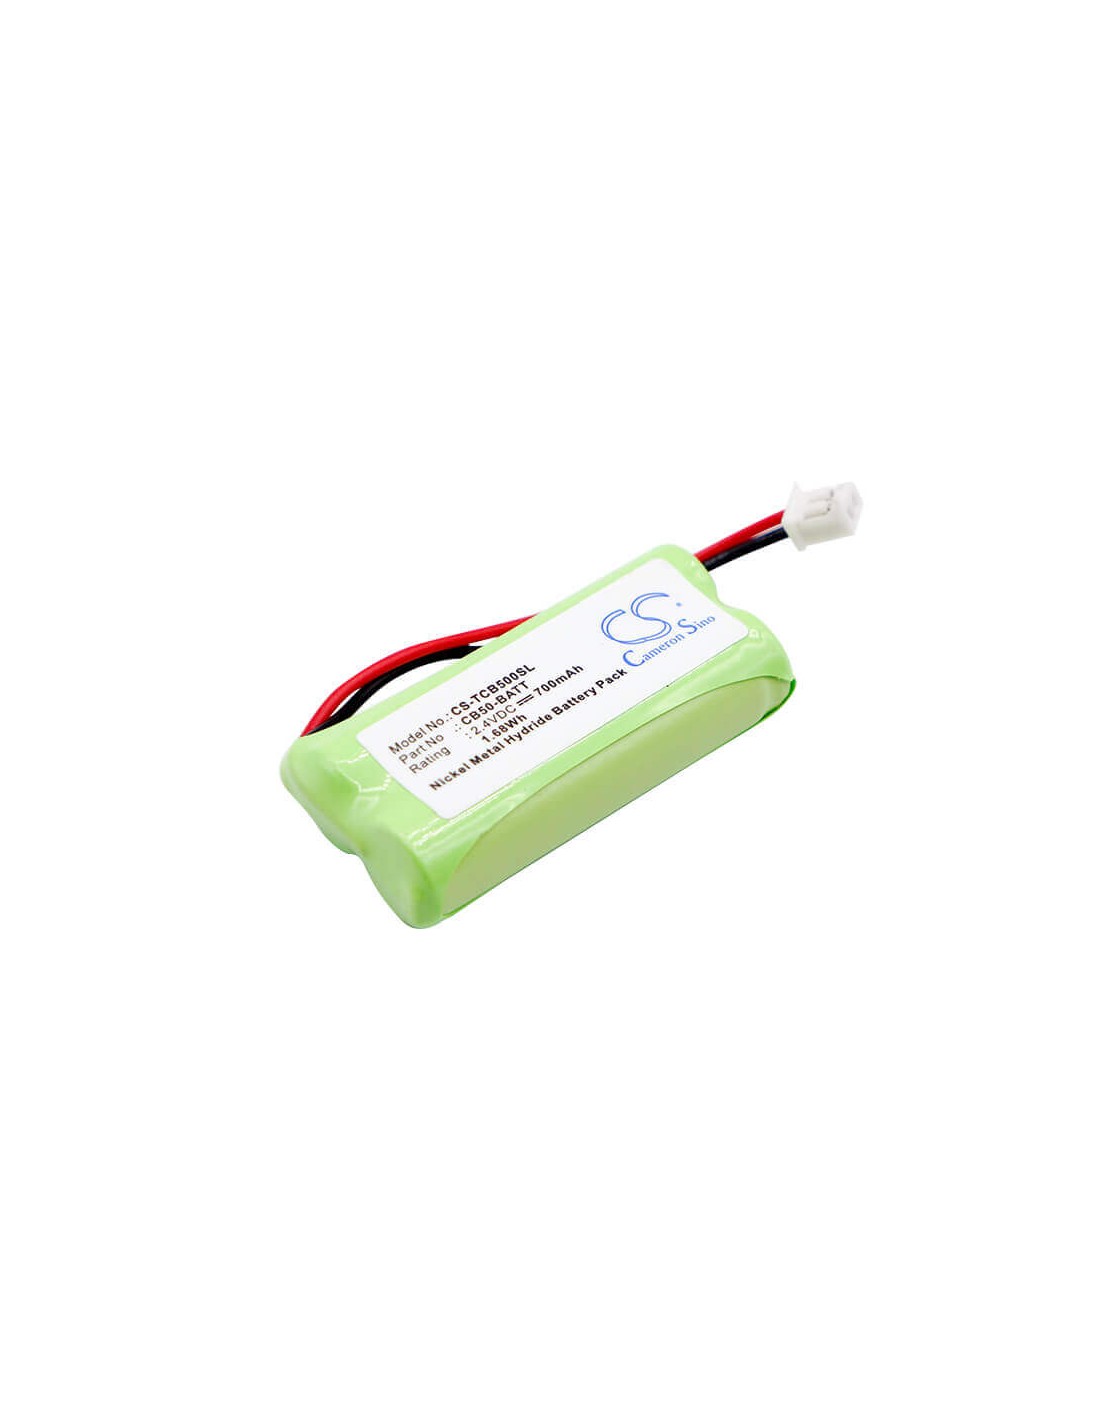 Battery for Chatterbox Cb-50 2.4V, 700mAh - 1.68Wh